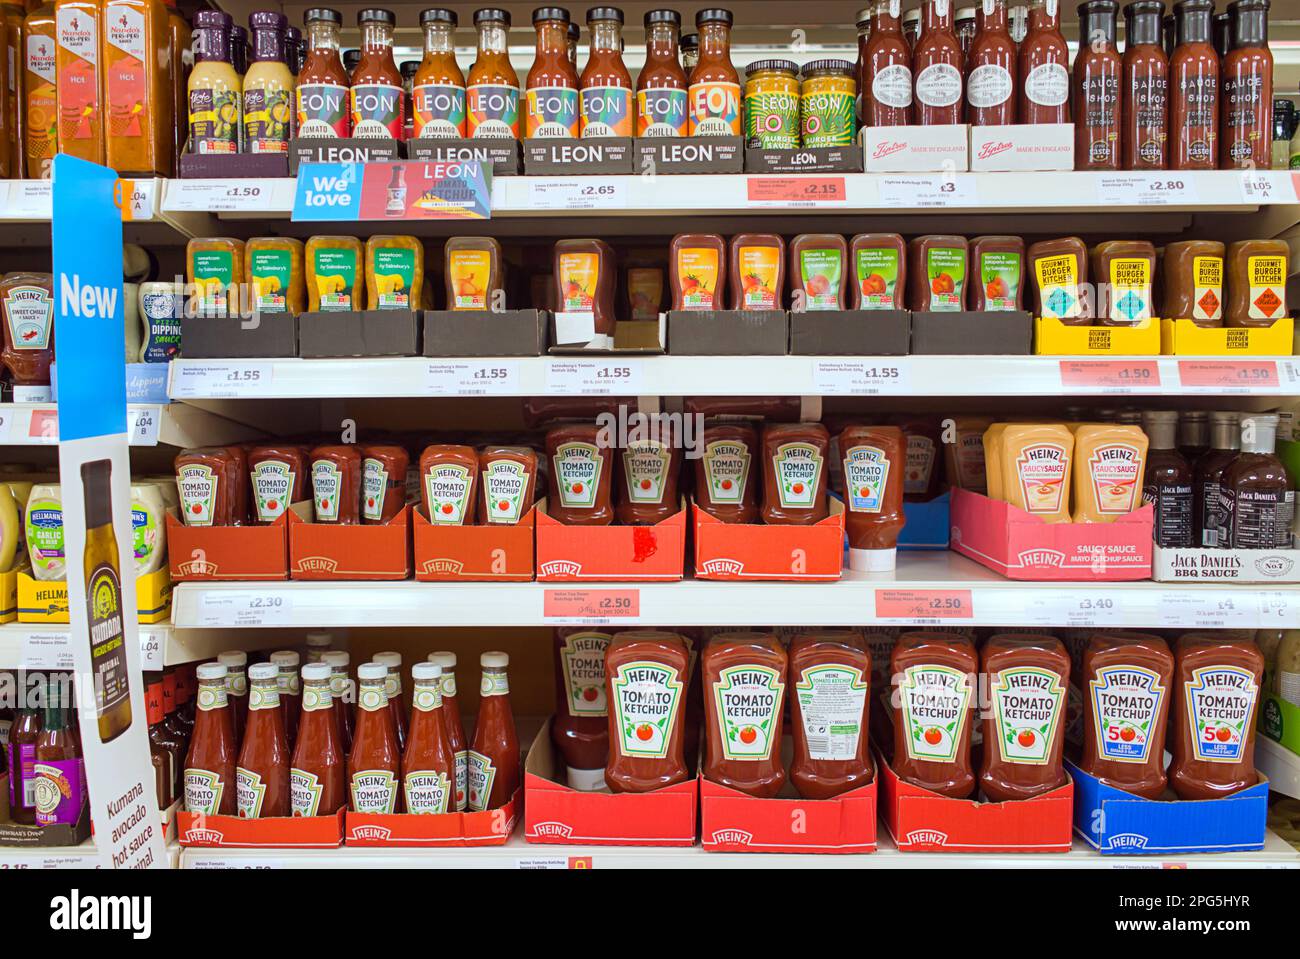 Supermarket shelf full of sauces including heinz tomato ketchup Stock Photo